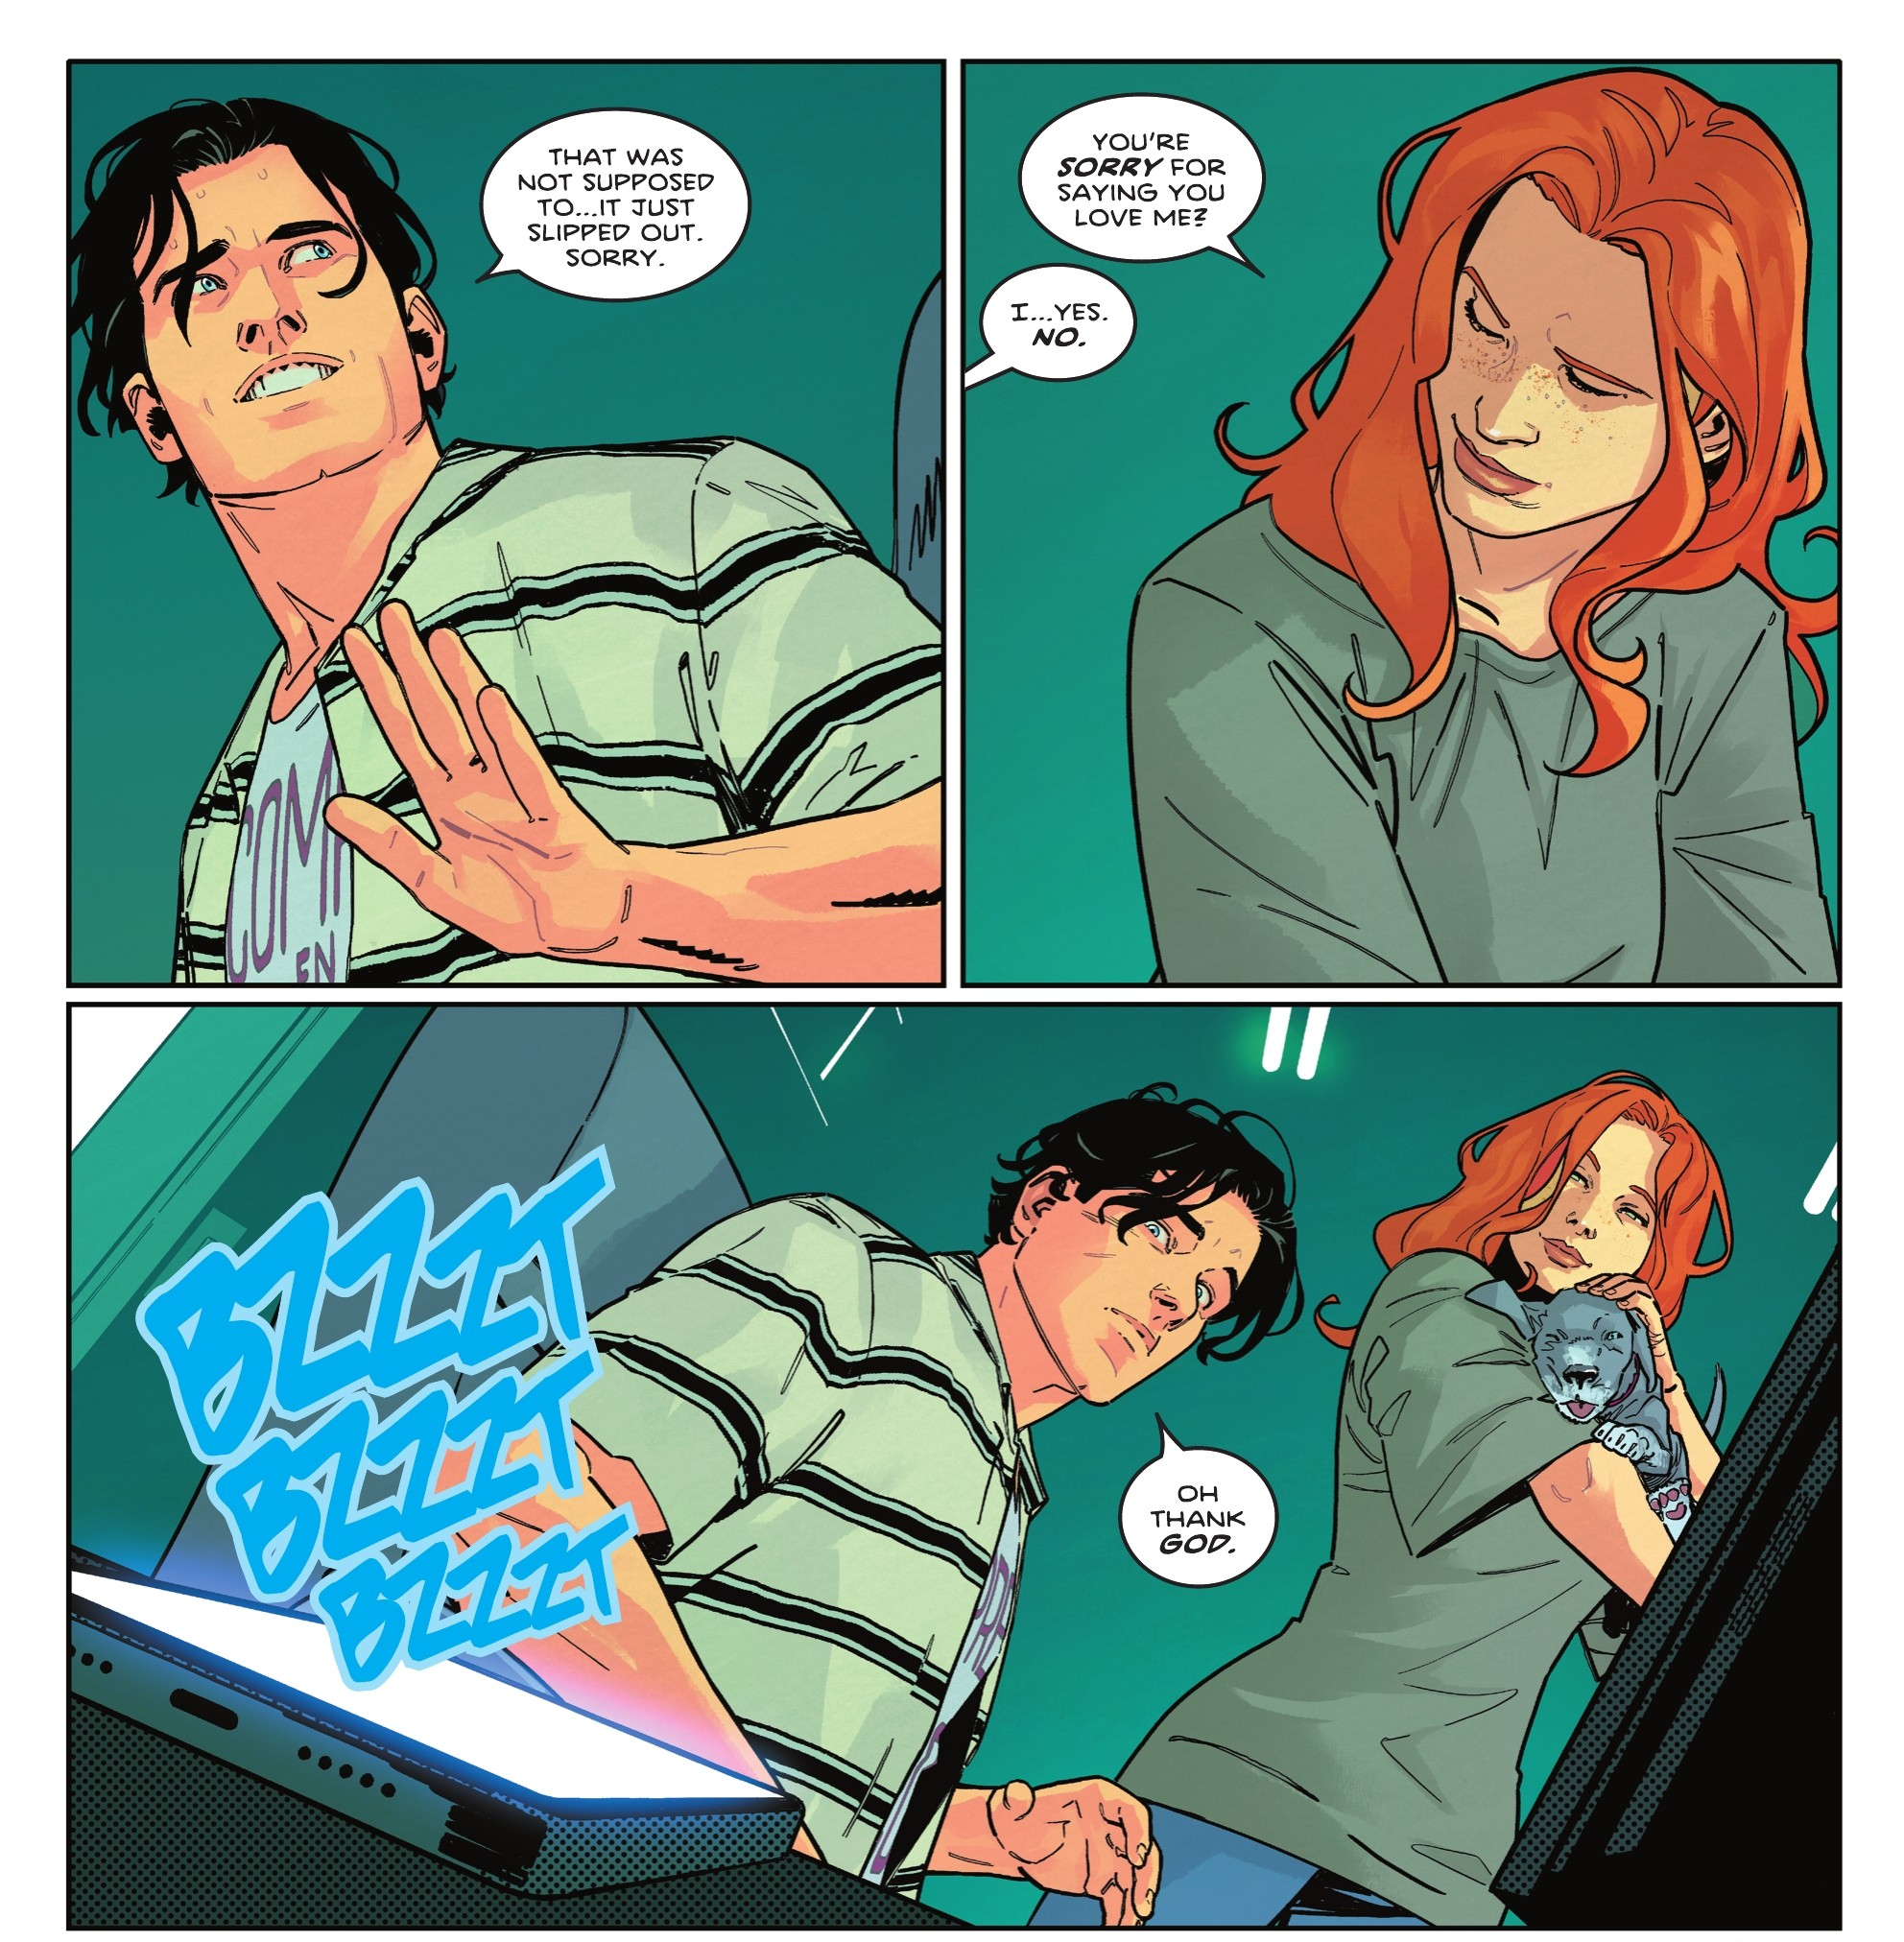 Barbara Gordon asks Dick if he truly meant to apologize for loving her, from Nightwing #93.